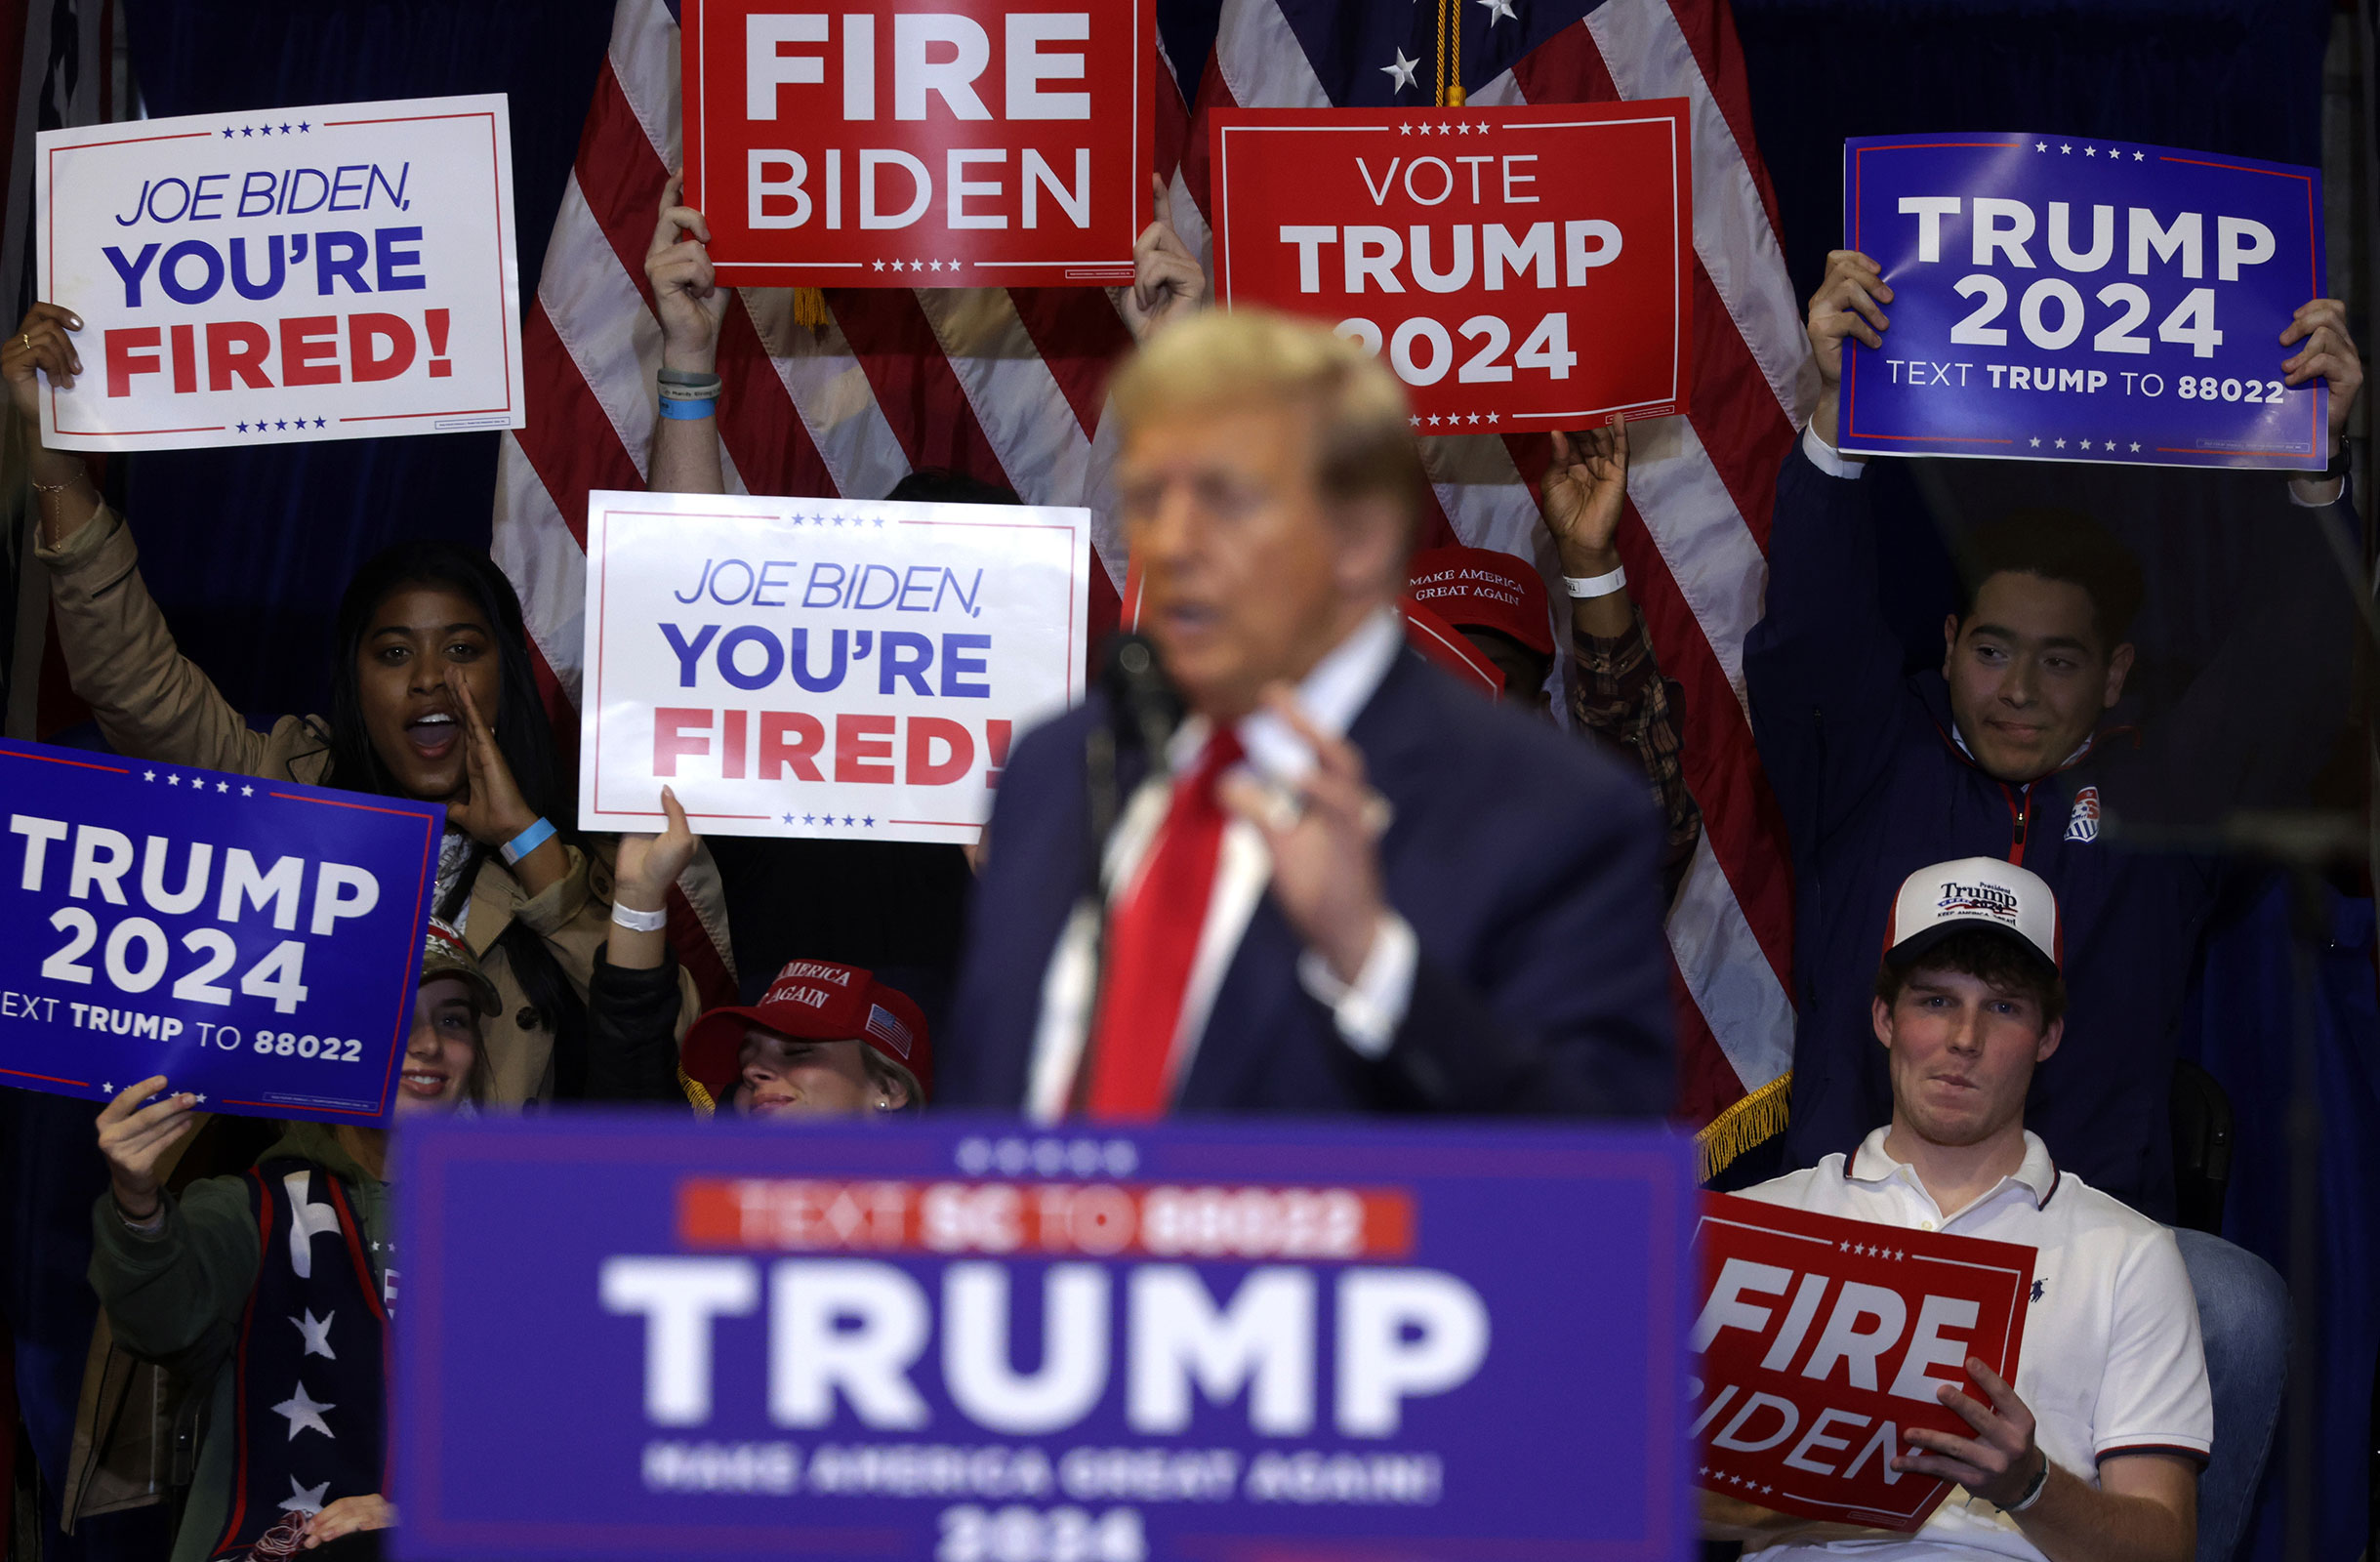 Supporters cheer as former President Donald Trump speaks during a campaign event at the Winthrop Coliseum on February 23, in Rock Hill, South Carolina. 